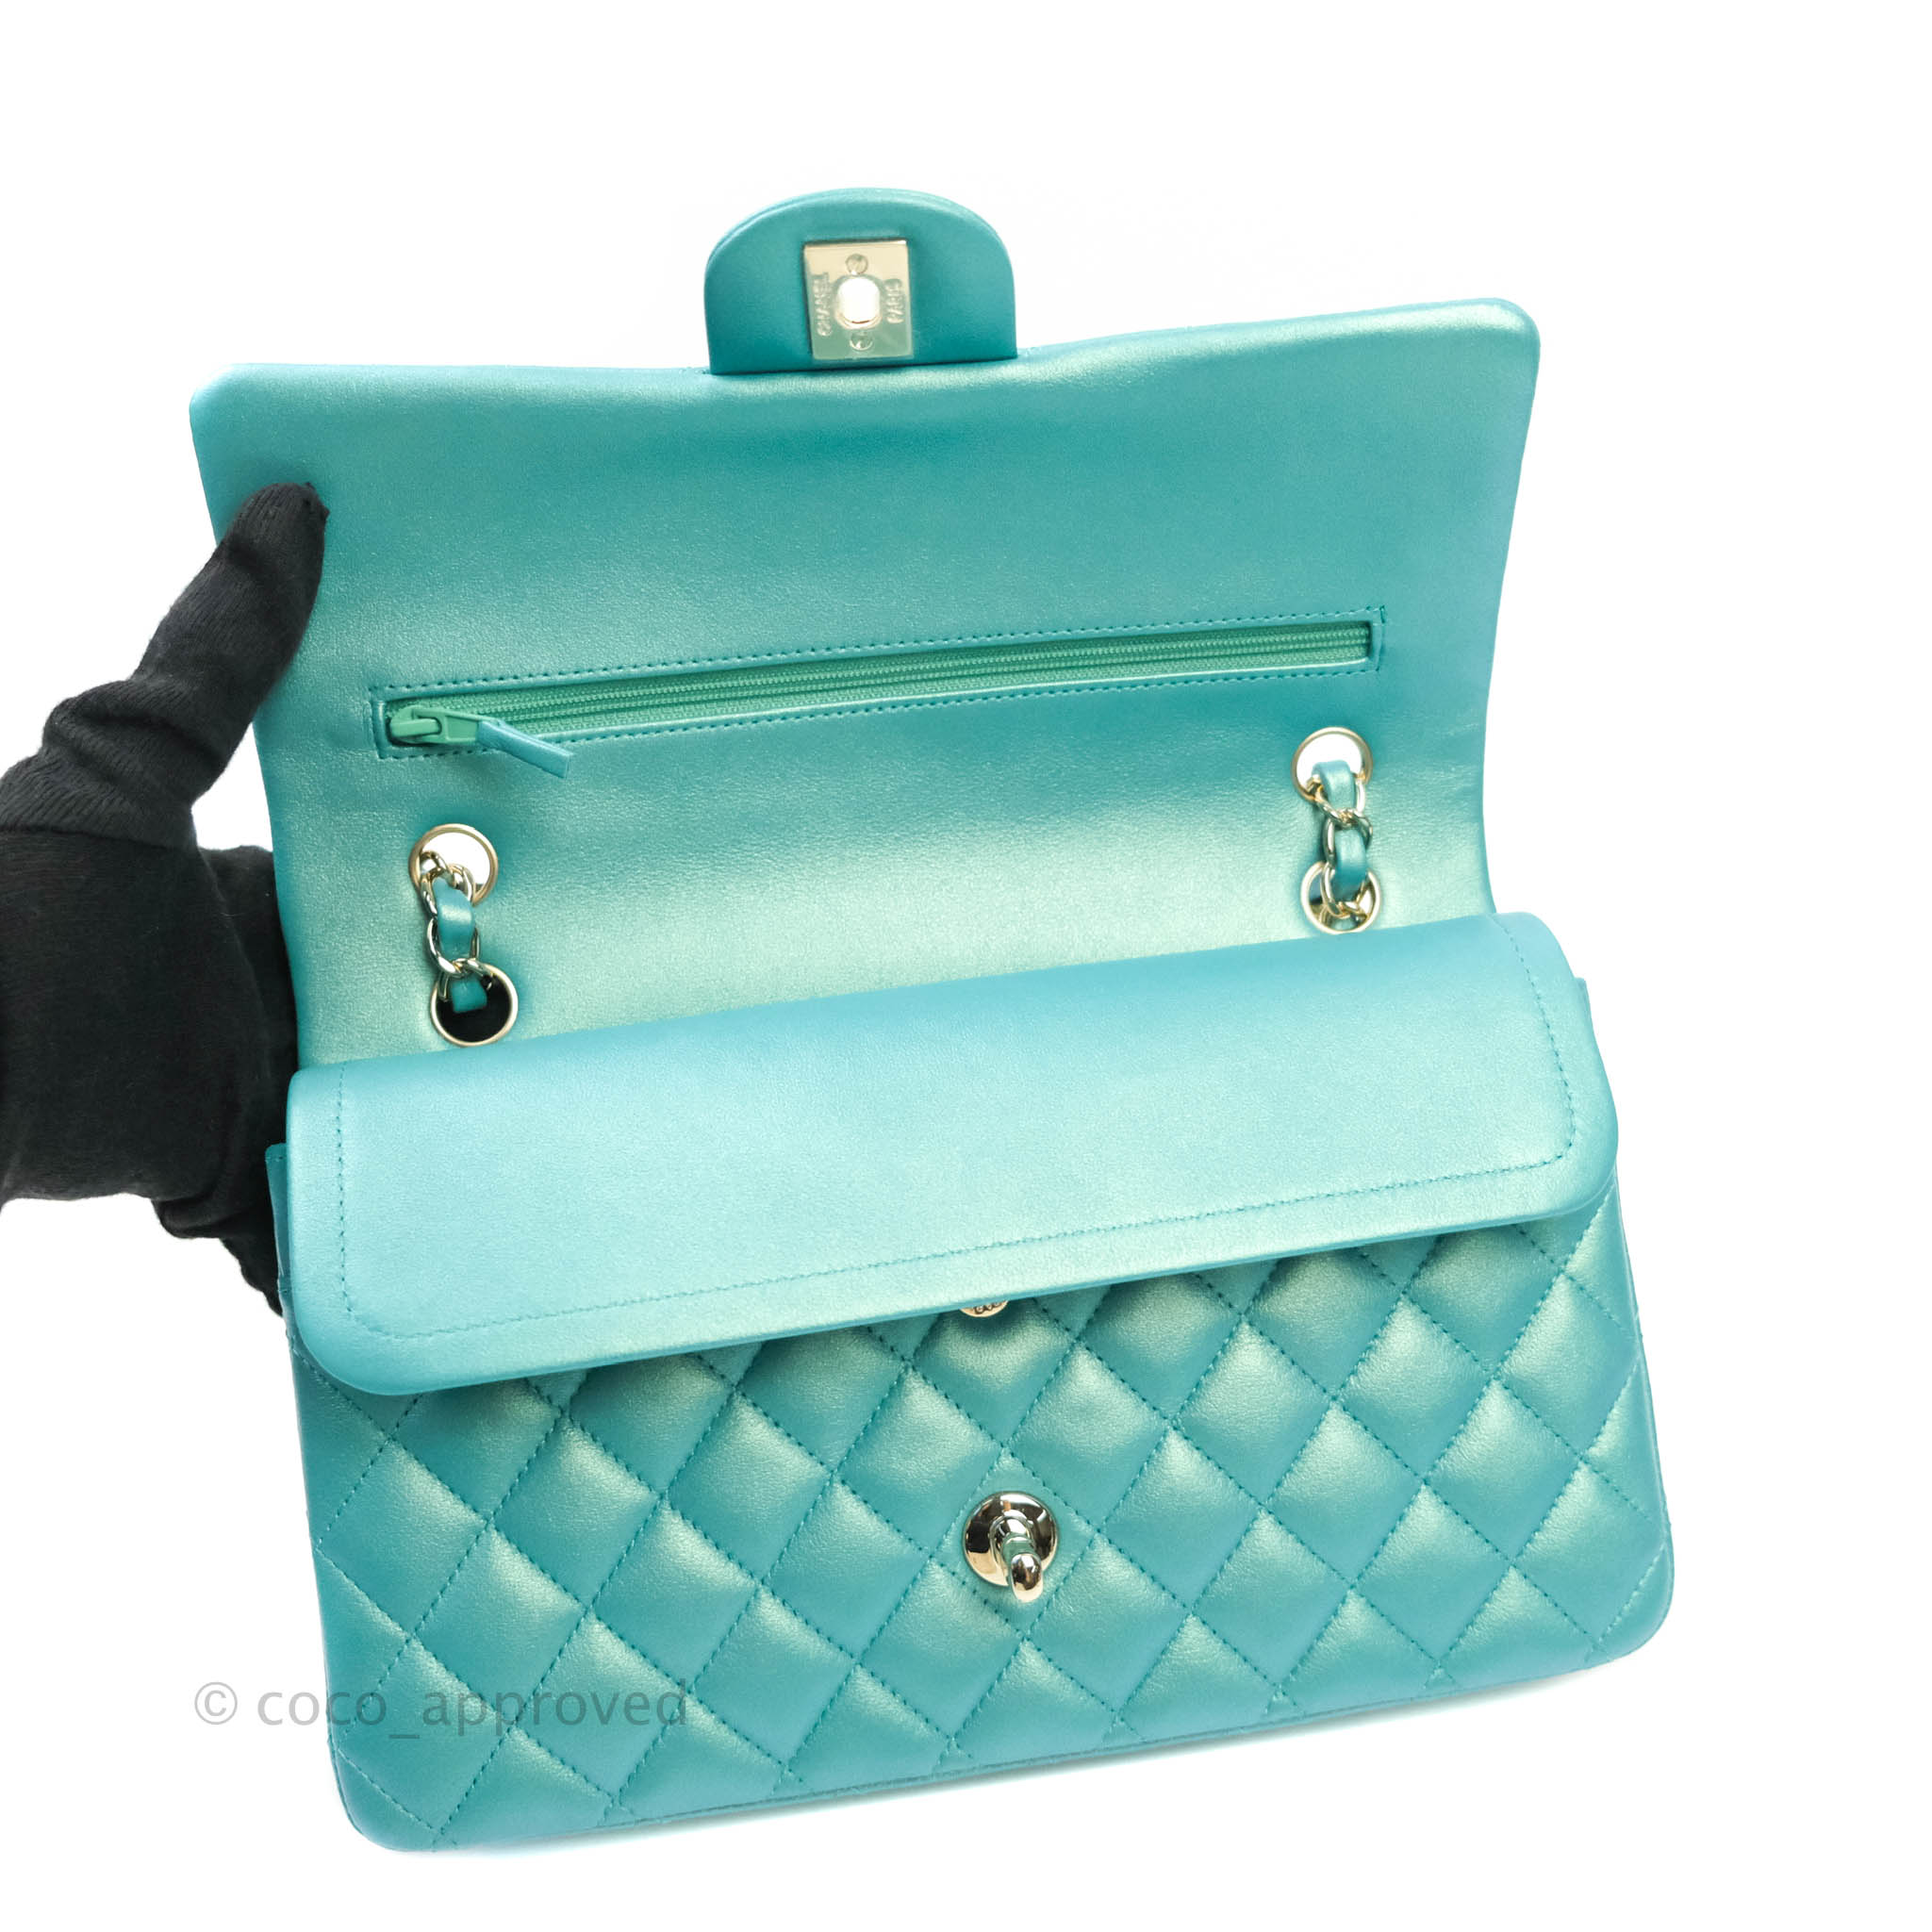 Chanel timeless double flap bag in turquoise Lambskin with gold hardware.